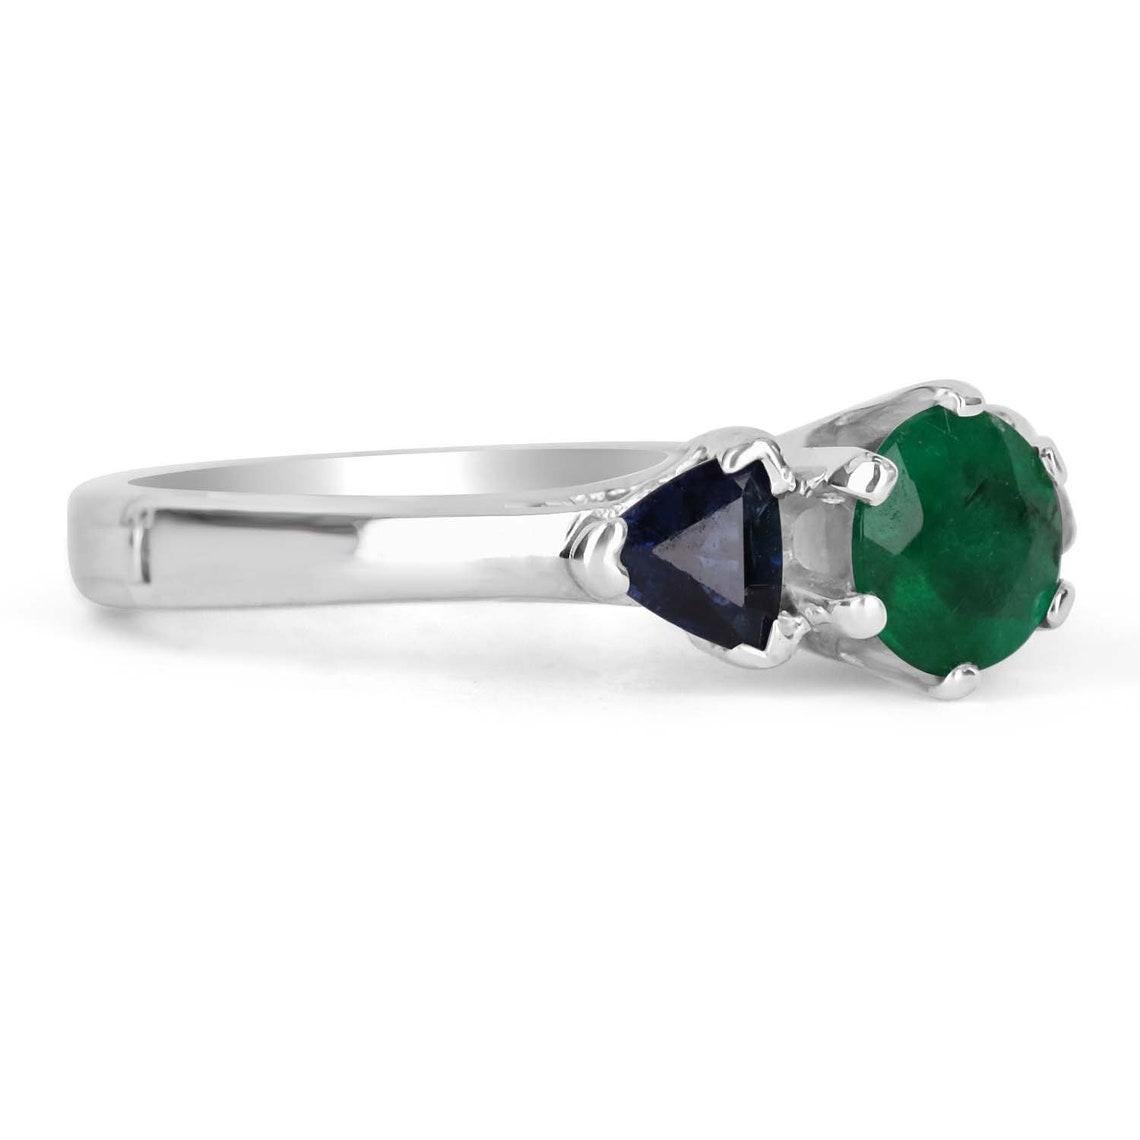 Displayed is a classic three stone ring with emerald and blue sapphire. This gorgeous ring carries a full 0.75-carat emerald in a six-prong setting. Fully faceted, this gemstone showcases excellent shine. The emerald has very good clarity with minor